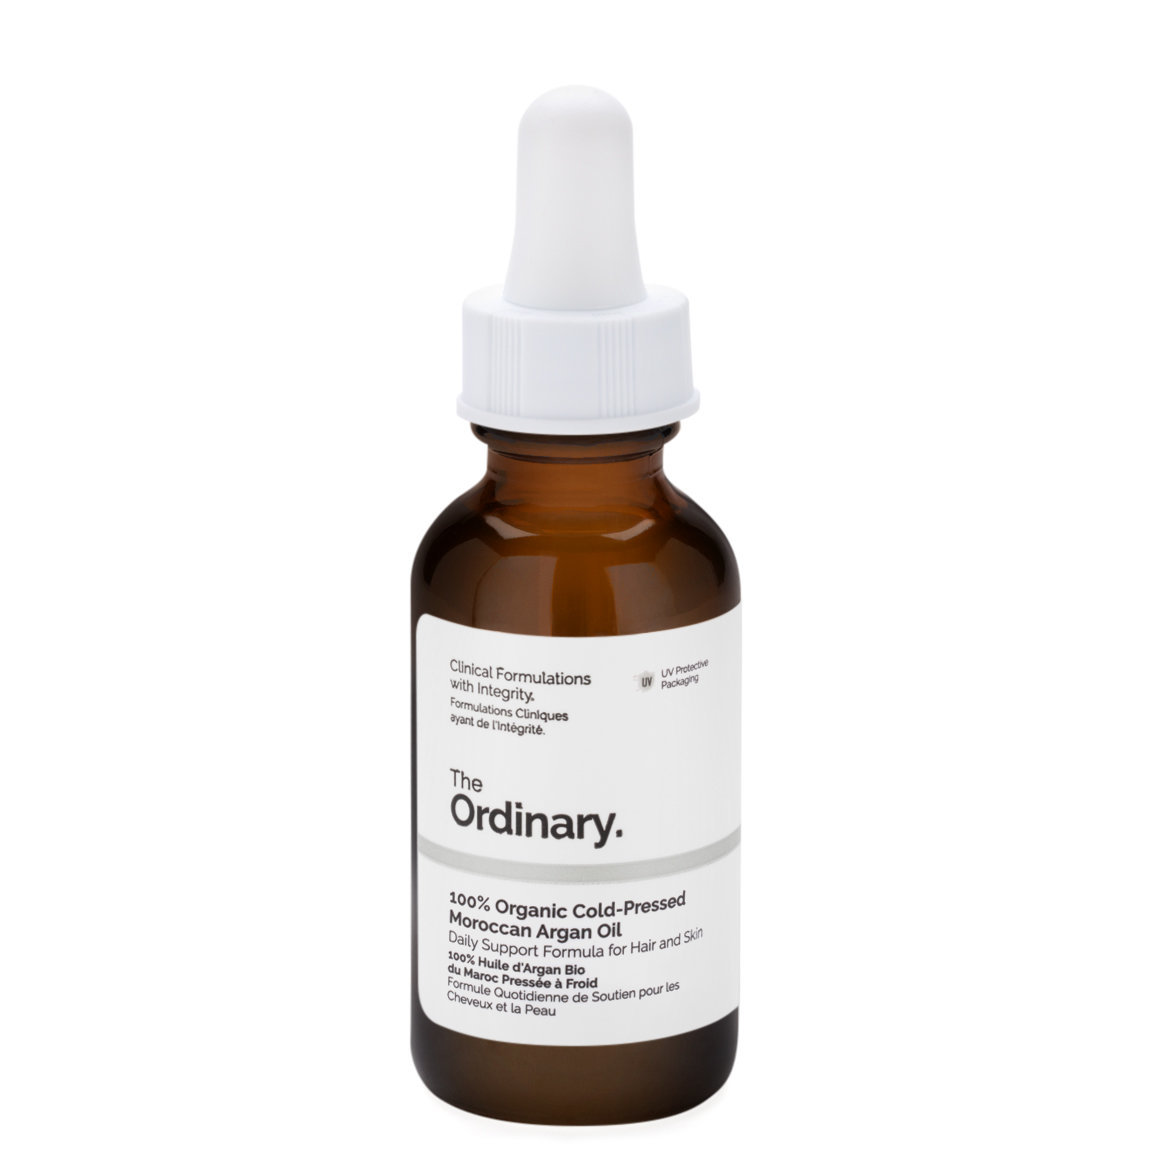 The Ordinary. 100% Organic Cold-Pressed Moroccan Argan Oil alternative view 1 - product swatch.